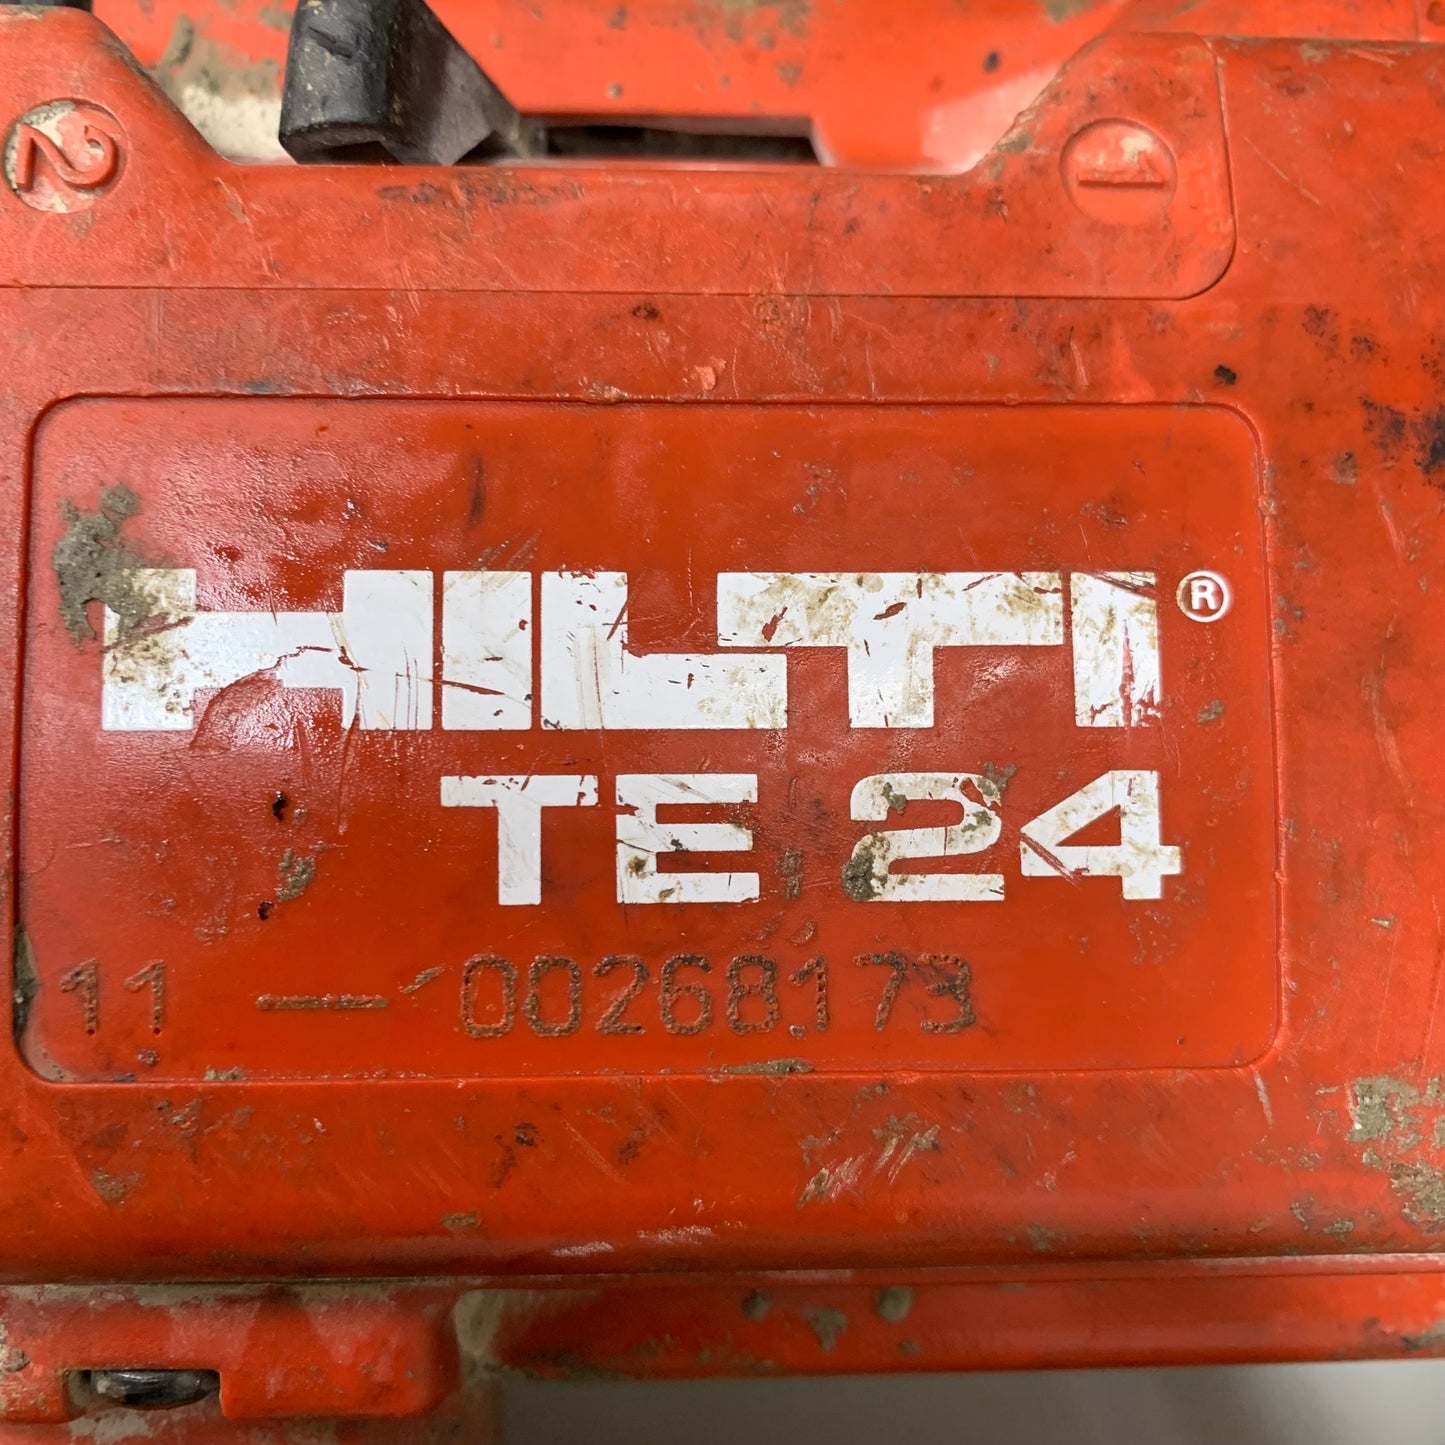 HILTI Hammer Drill w/ Case & Variety of Drill Bits & Chisels TE 24 (Pre-Owned)